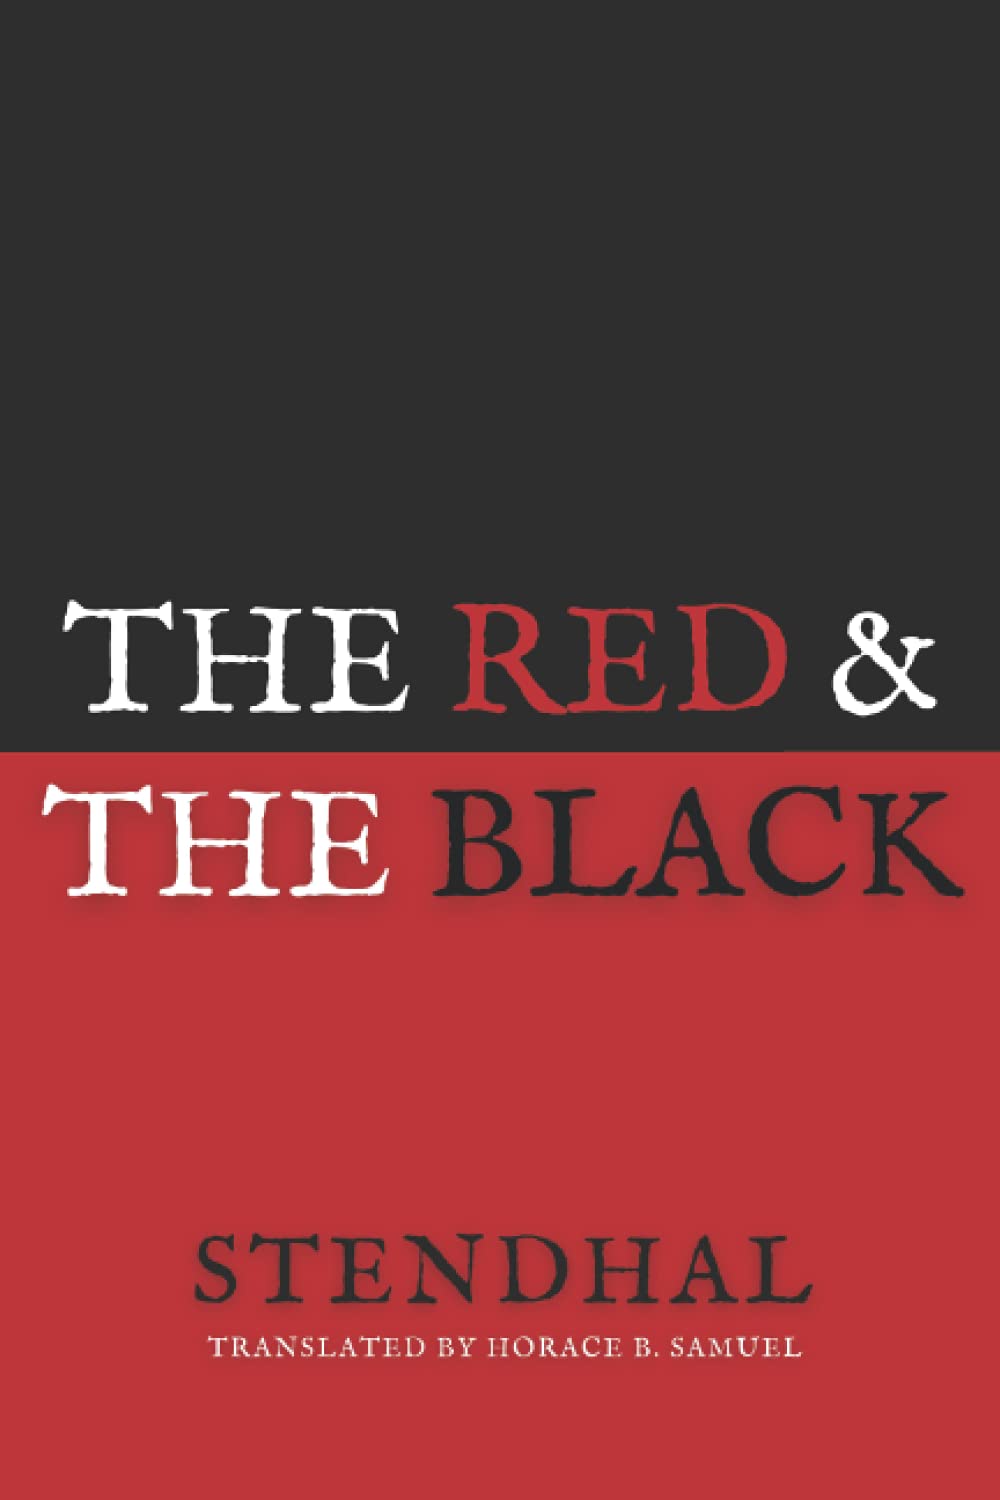 The Red & the Black